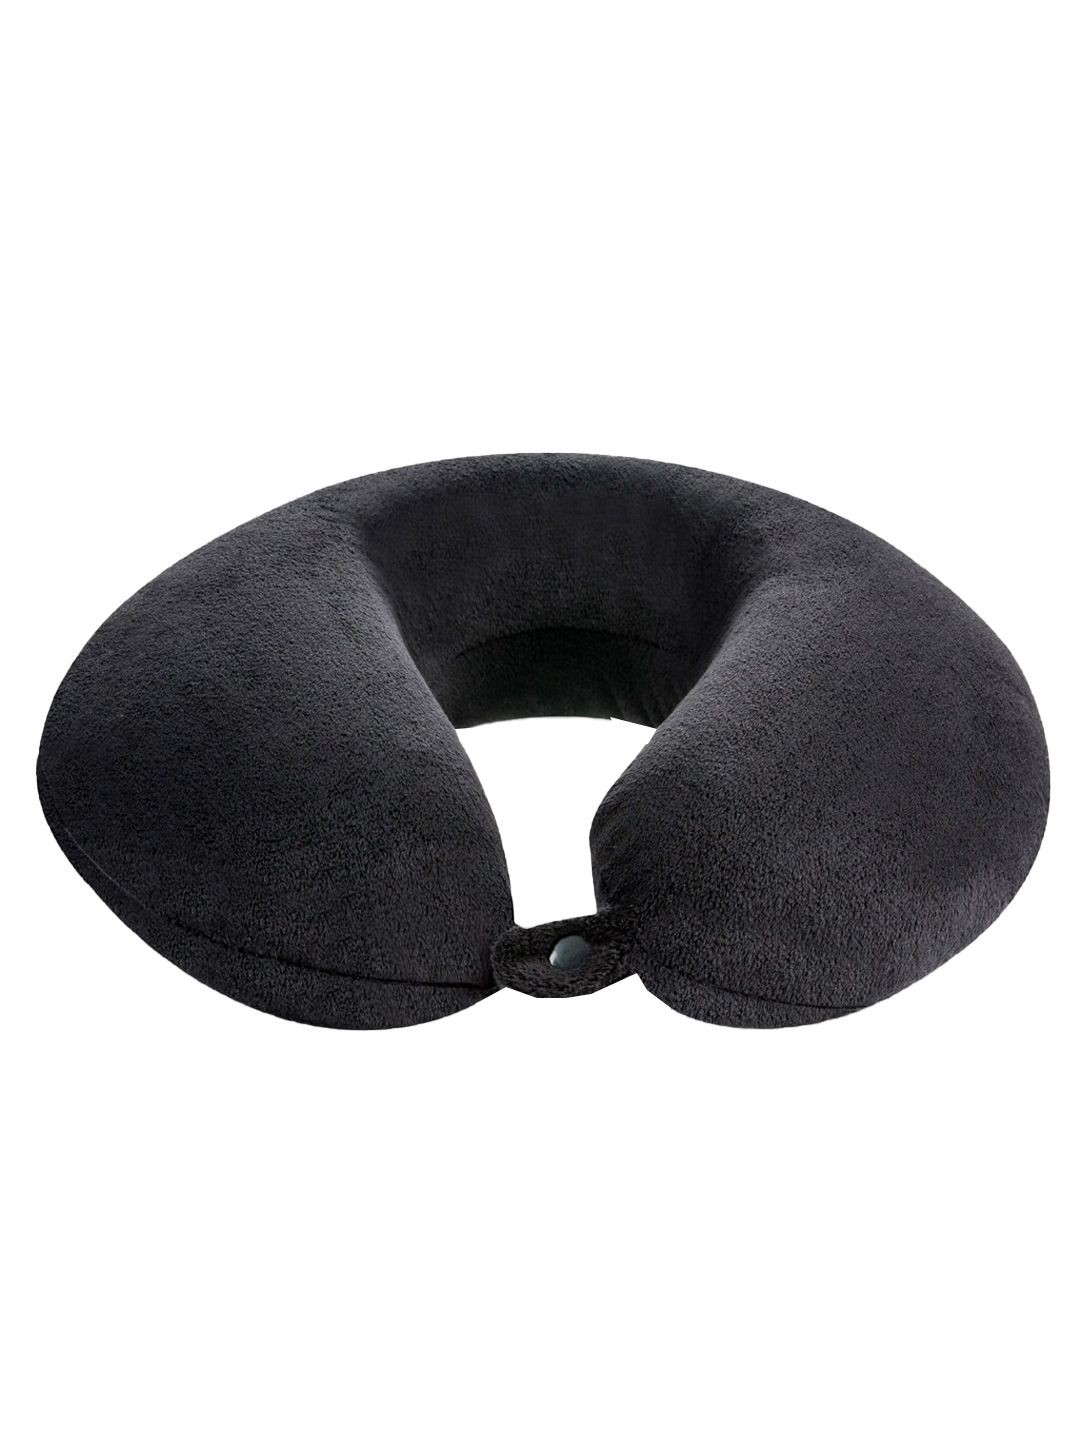 The White Willow Black Solid U Shaped Neck Rest Travel Pillows Price in India